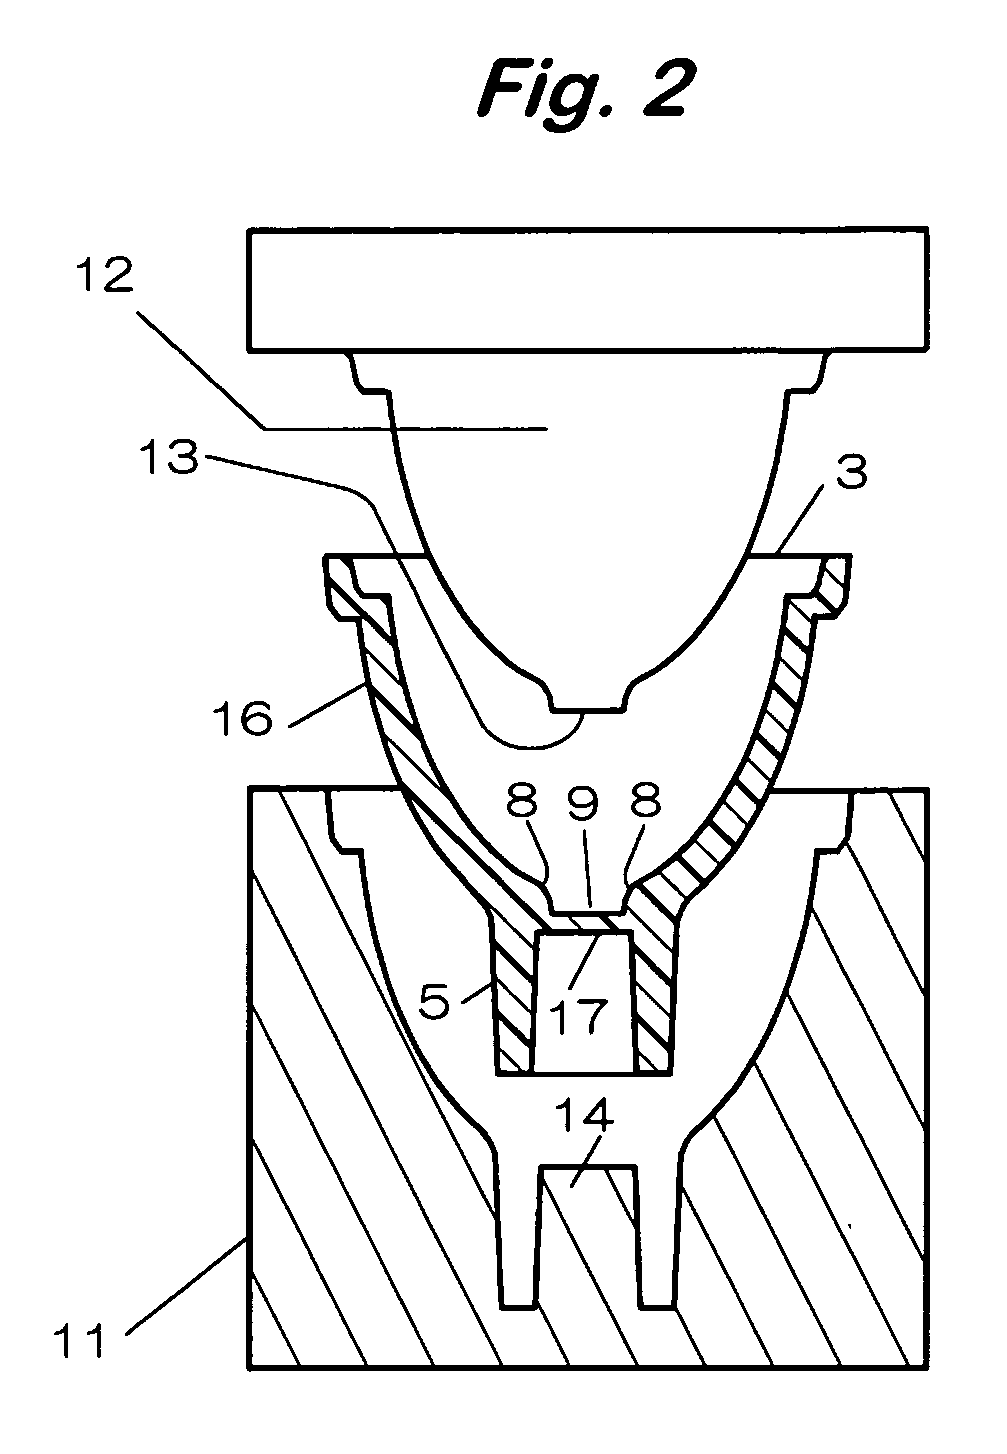 Method of manufacturing a glass reflector